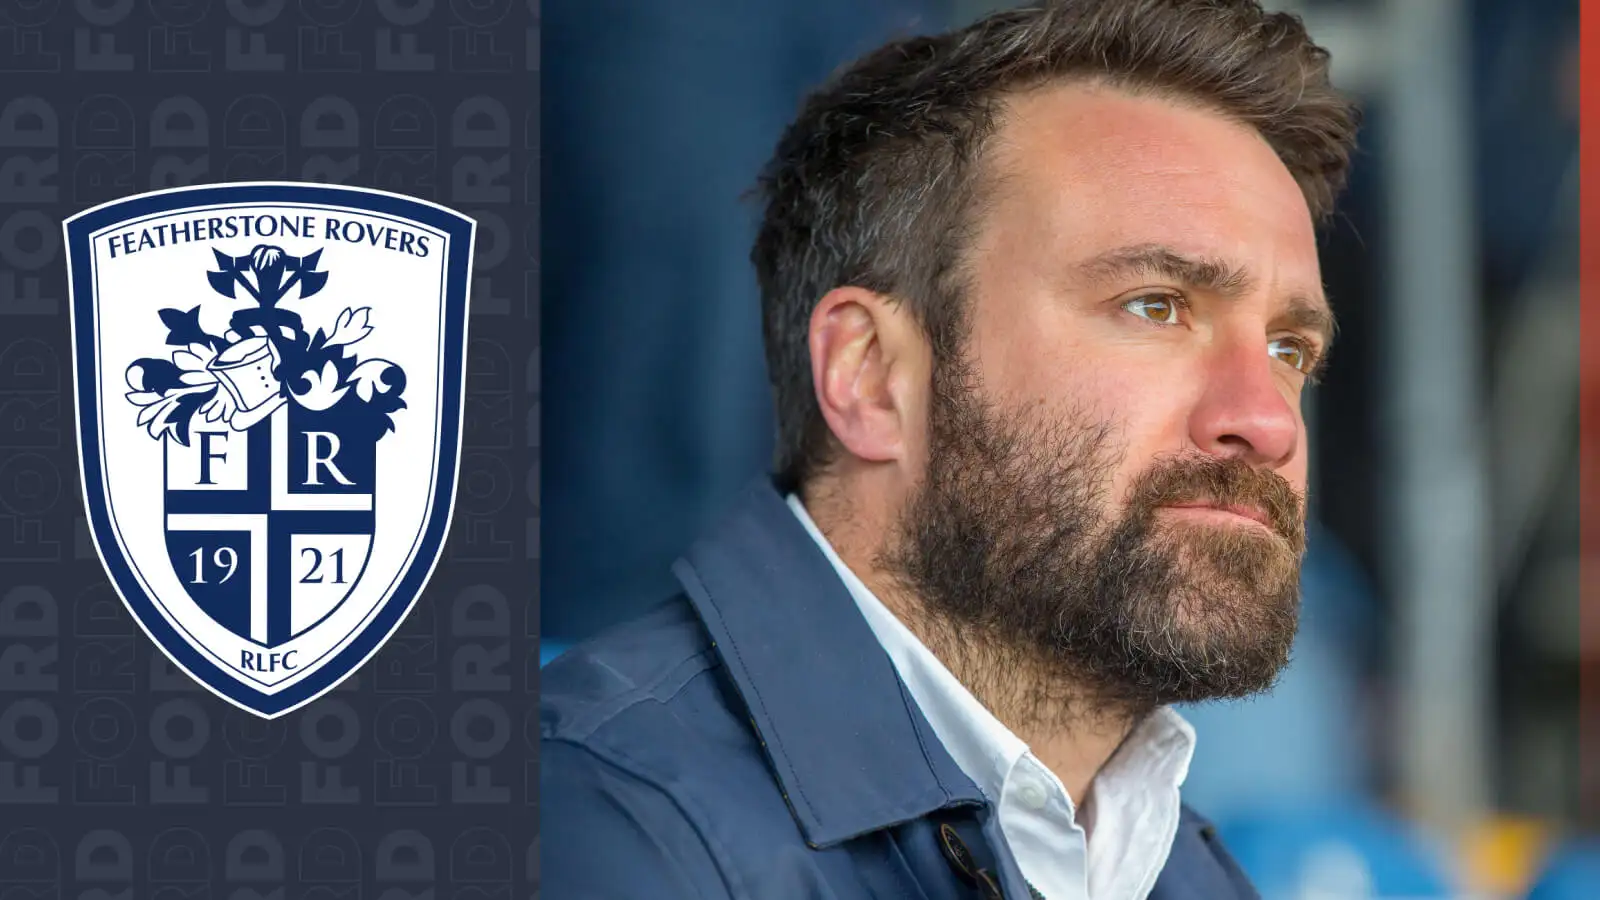 James Ford, Featherstone Rovers